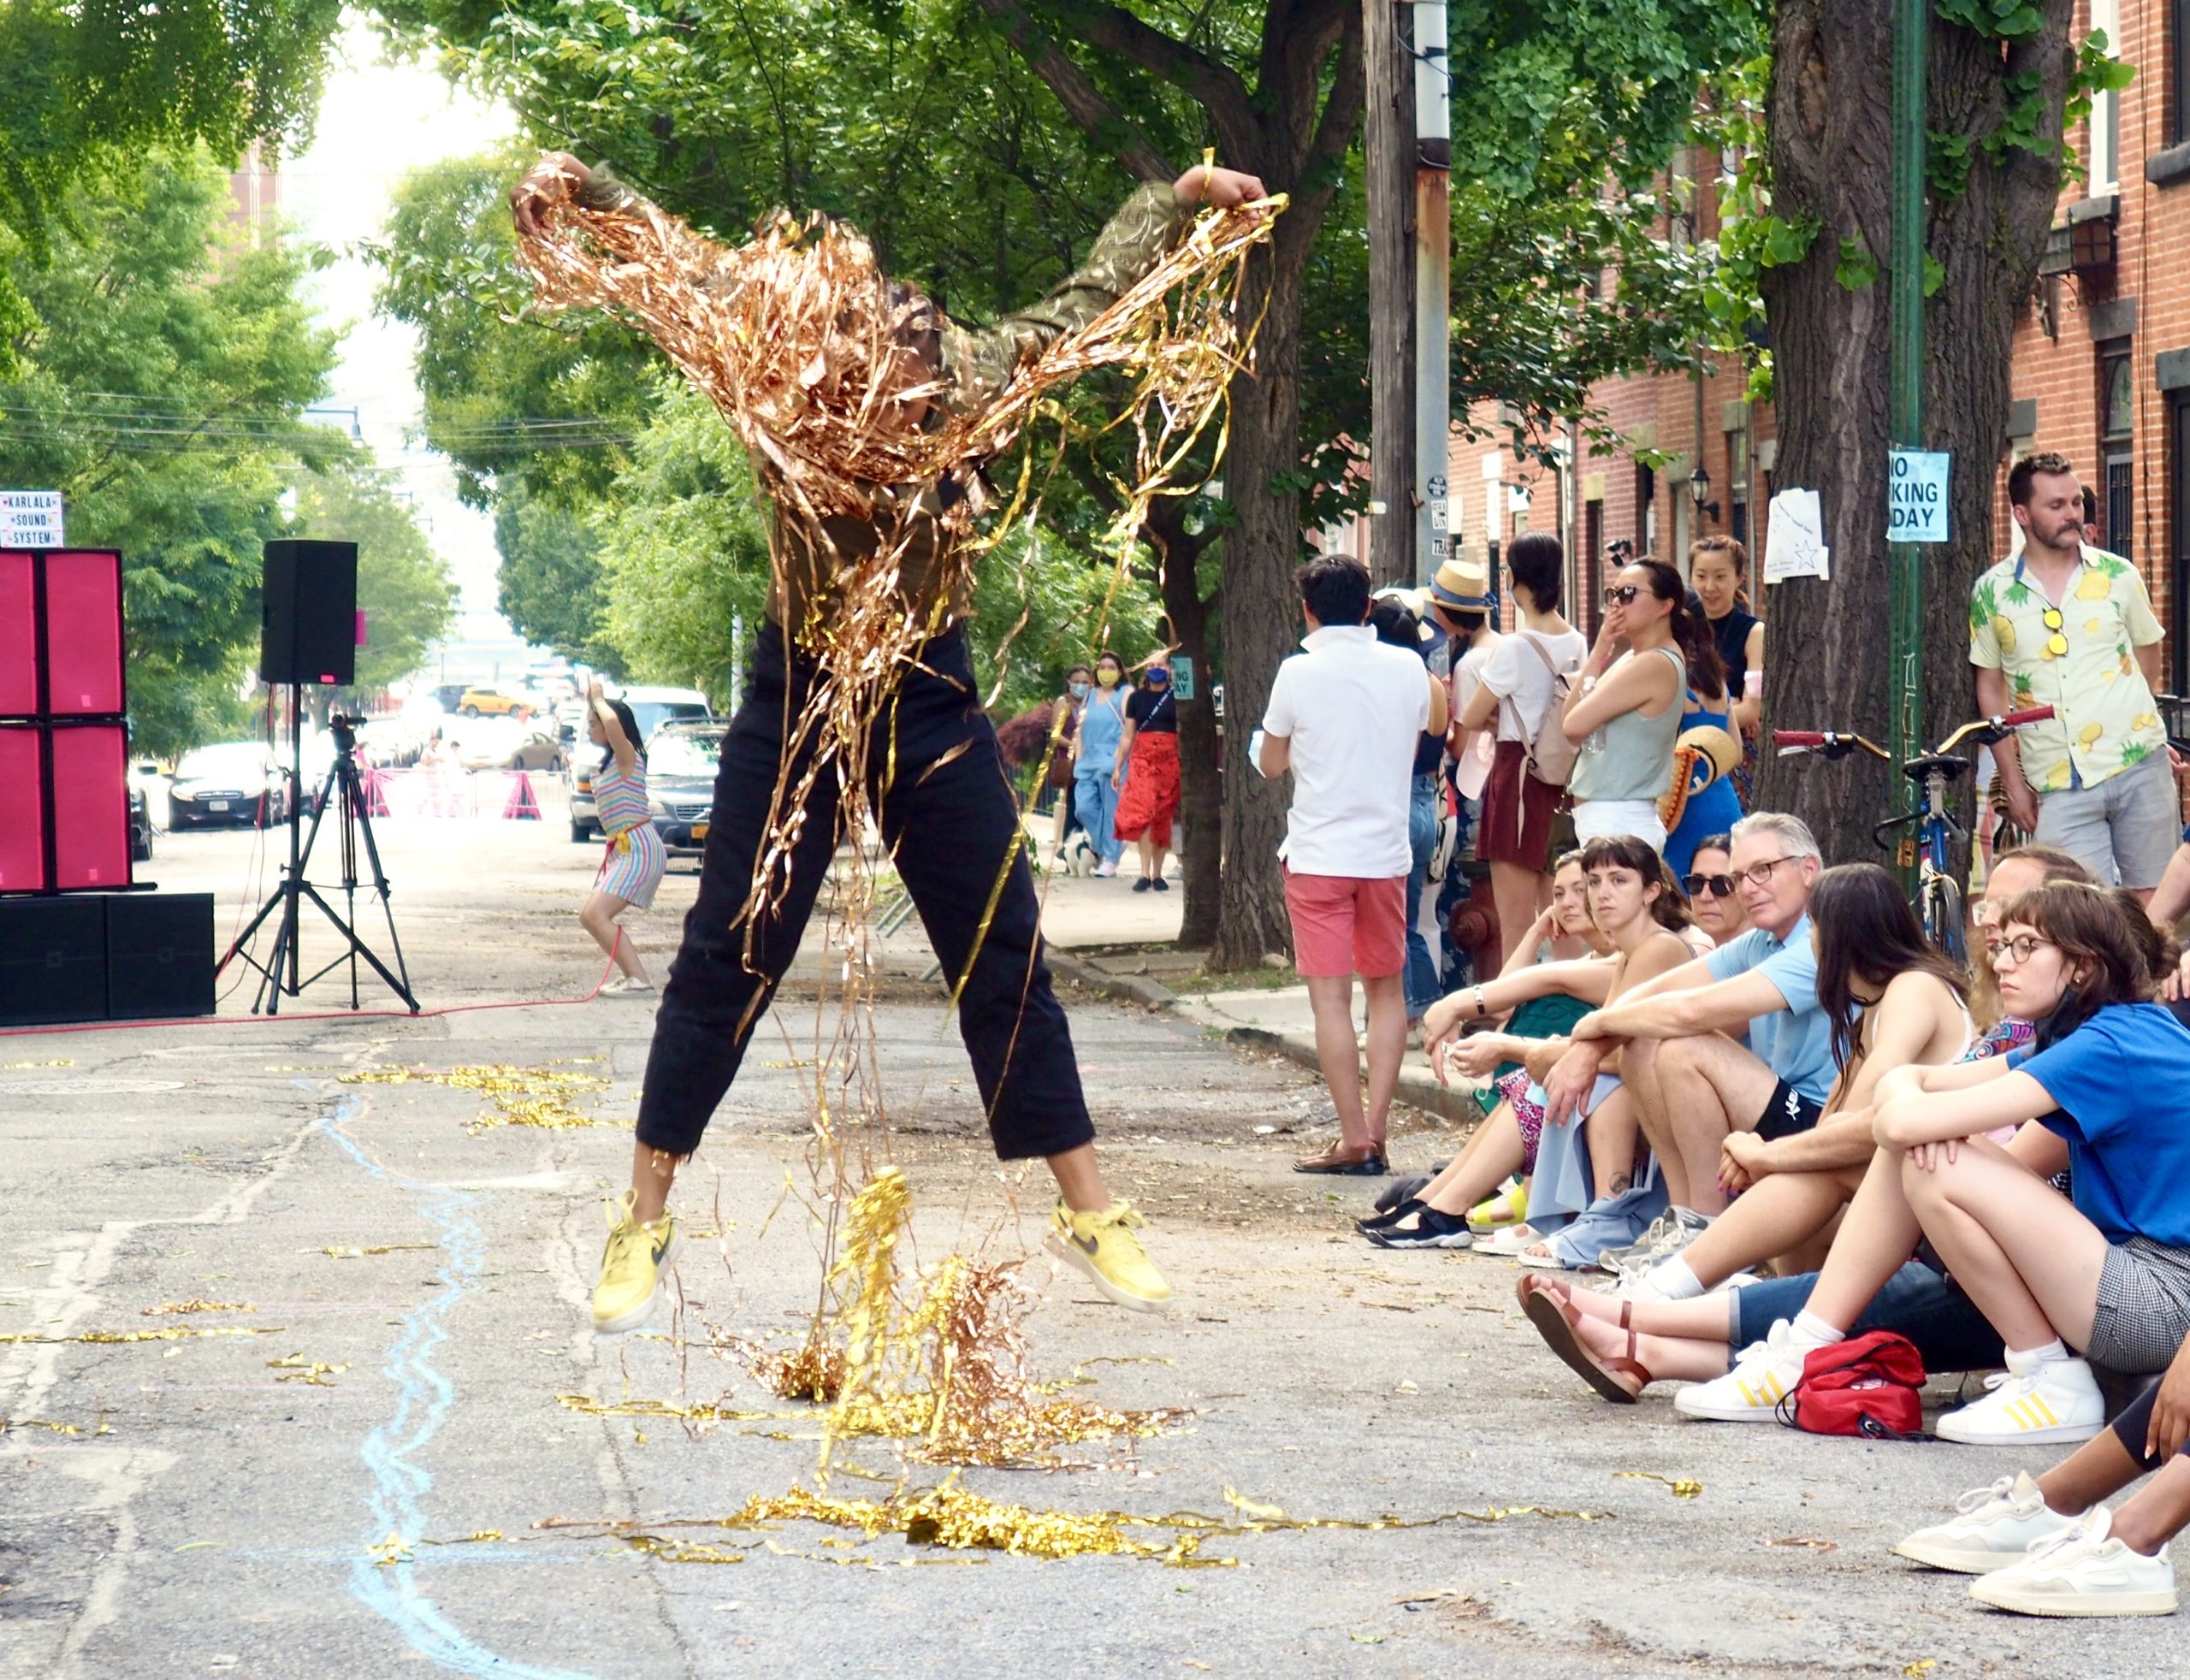 A performer jumping with their arms raised, in a cloud of gold tinsel. In the background, a group of people watching on a sidewalk.